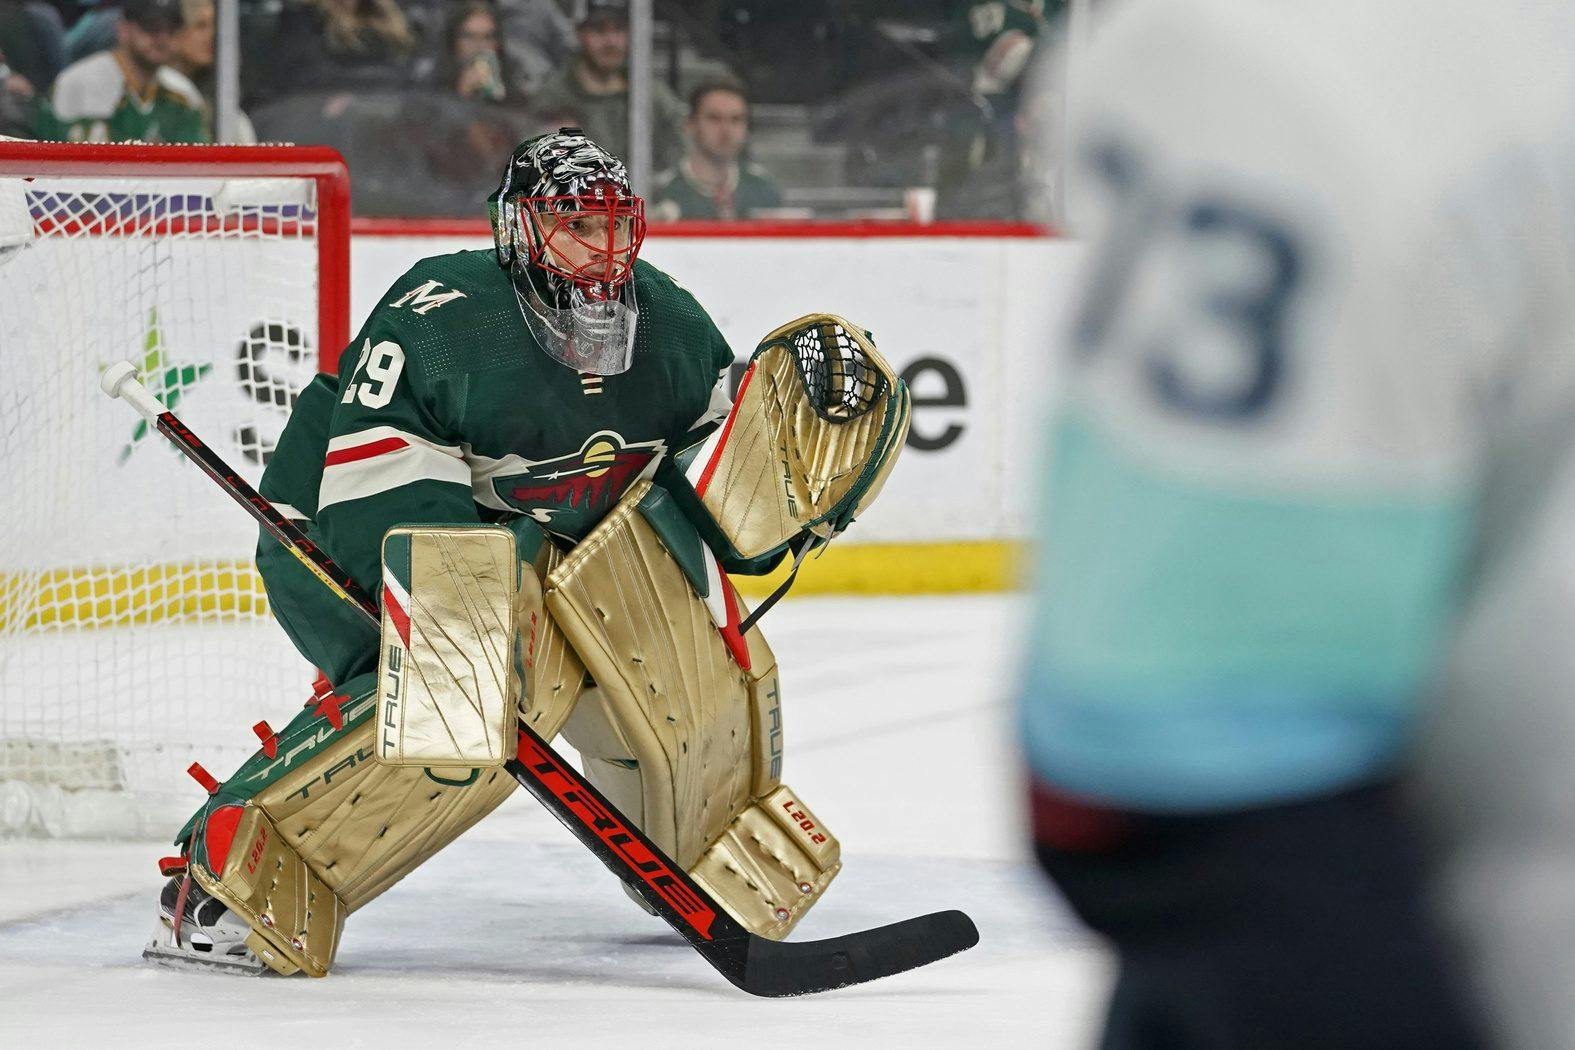 Minnesota Wild re-sign Marc-Andre Fleury to two-year contract with $3.5 million cap hit